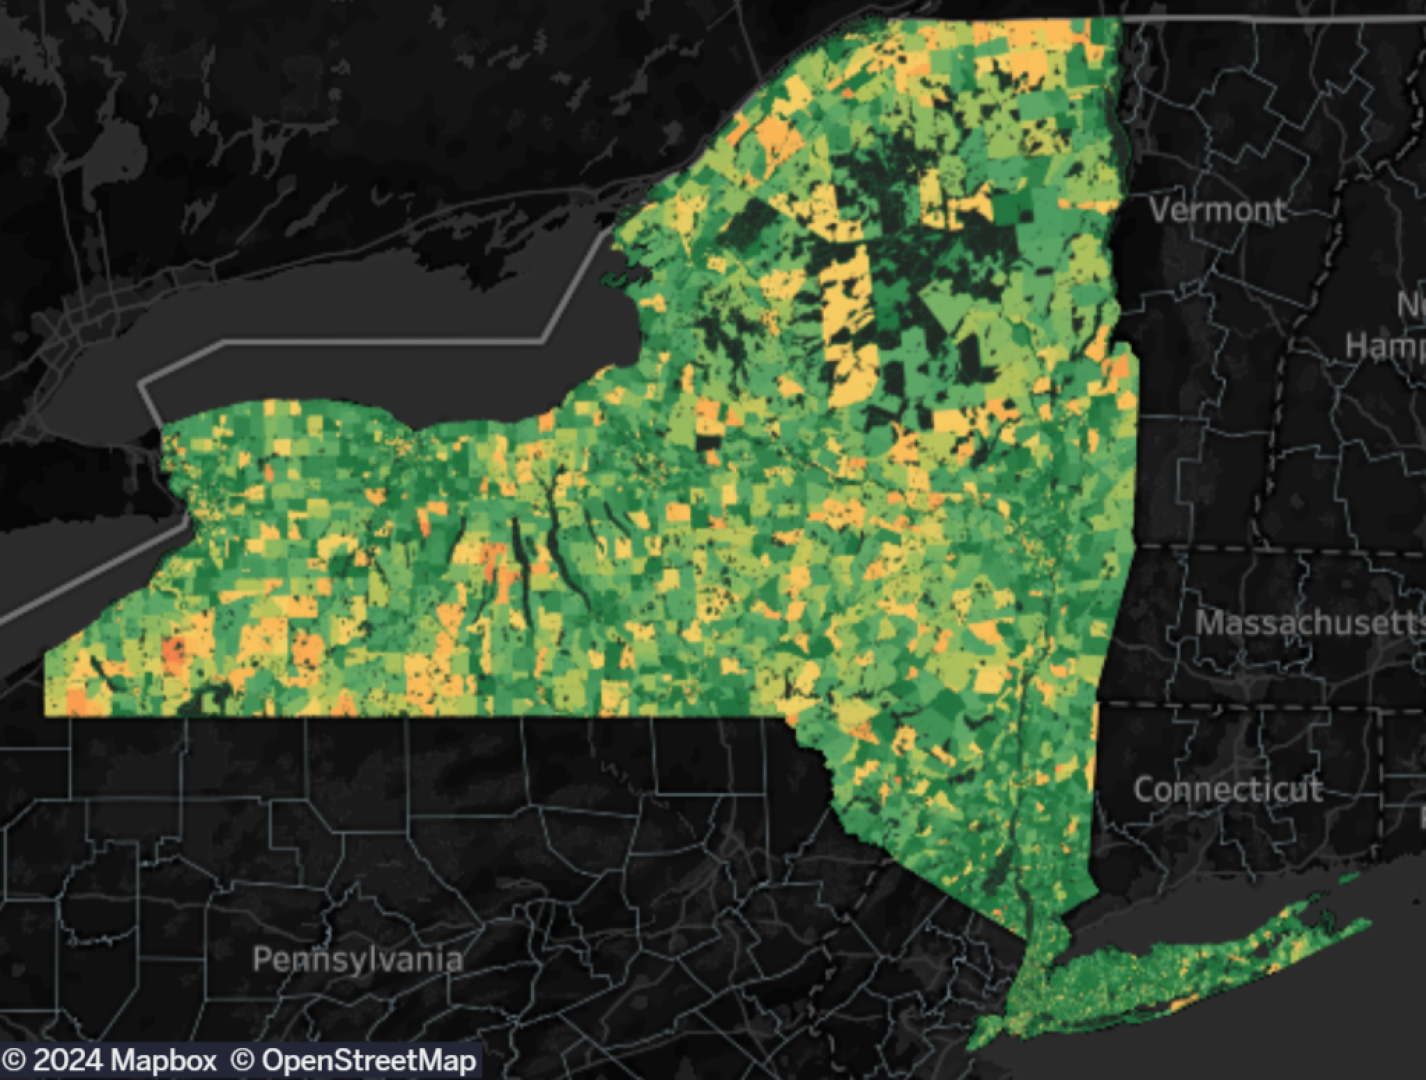 Broadband for All? Mapping and Discussing Progress and Remaining Challenges Across NYS